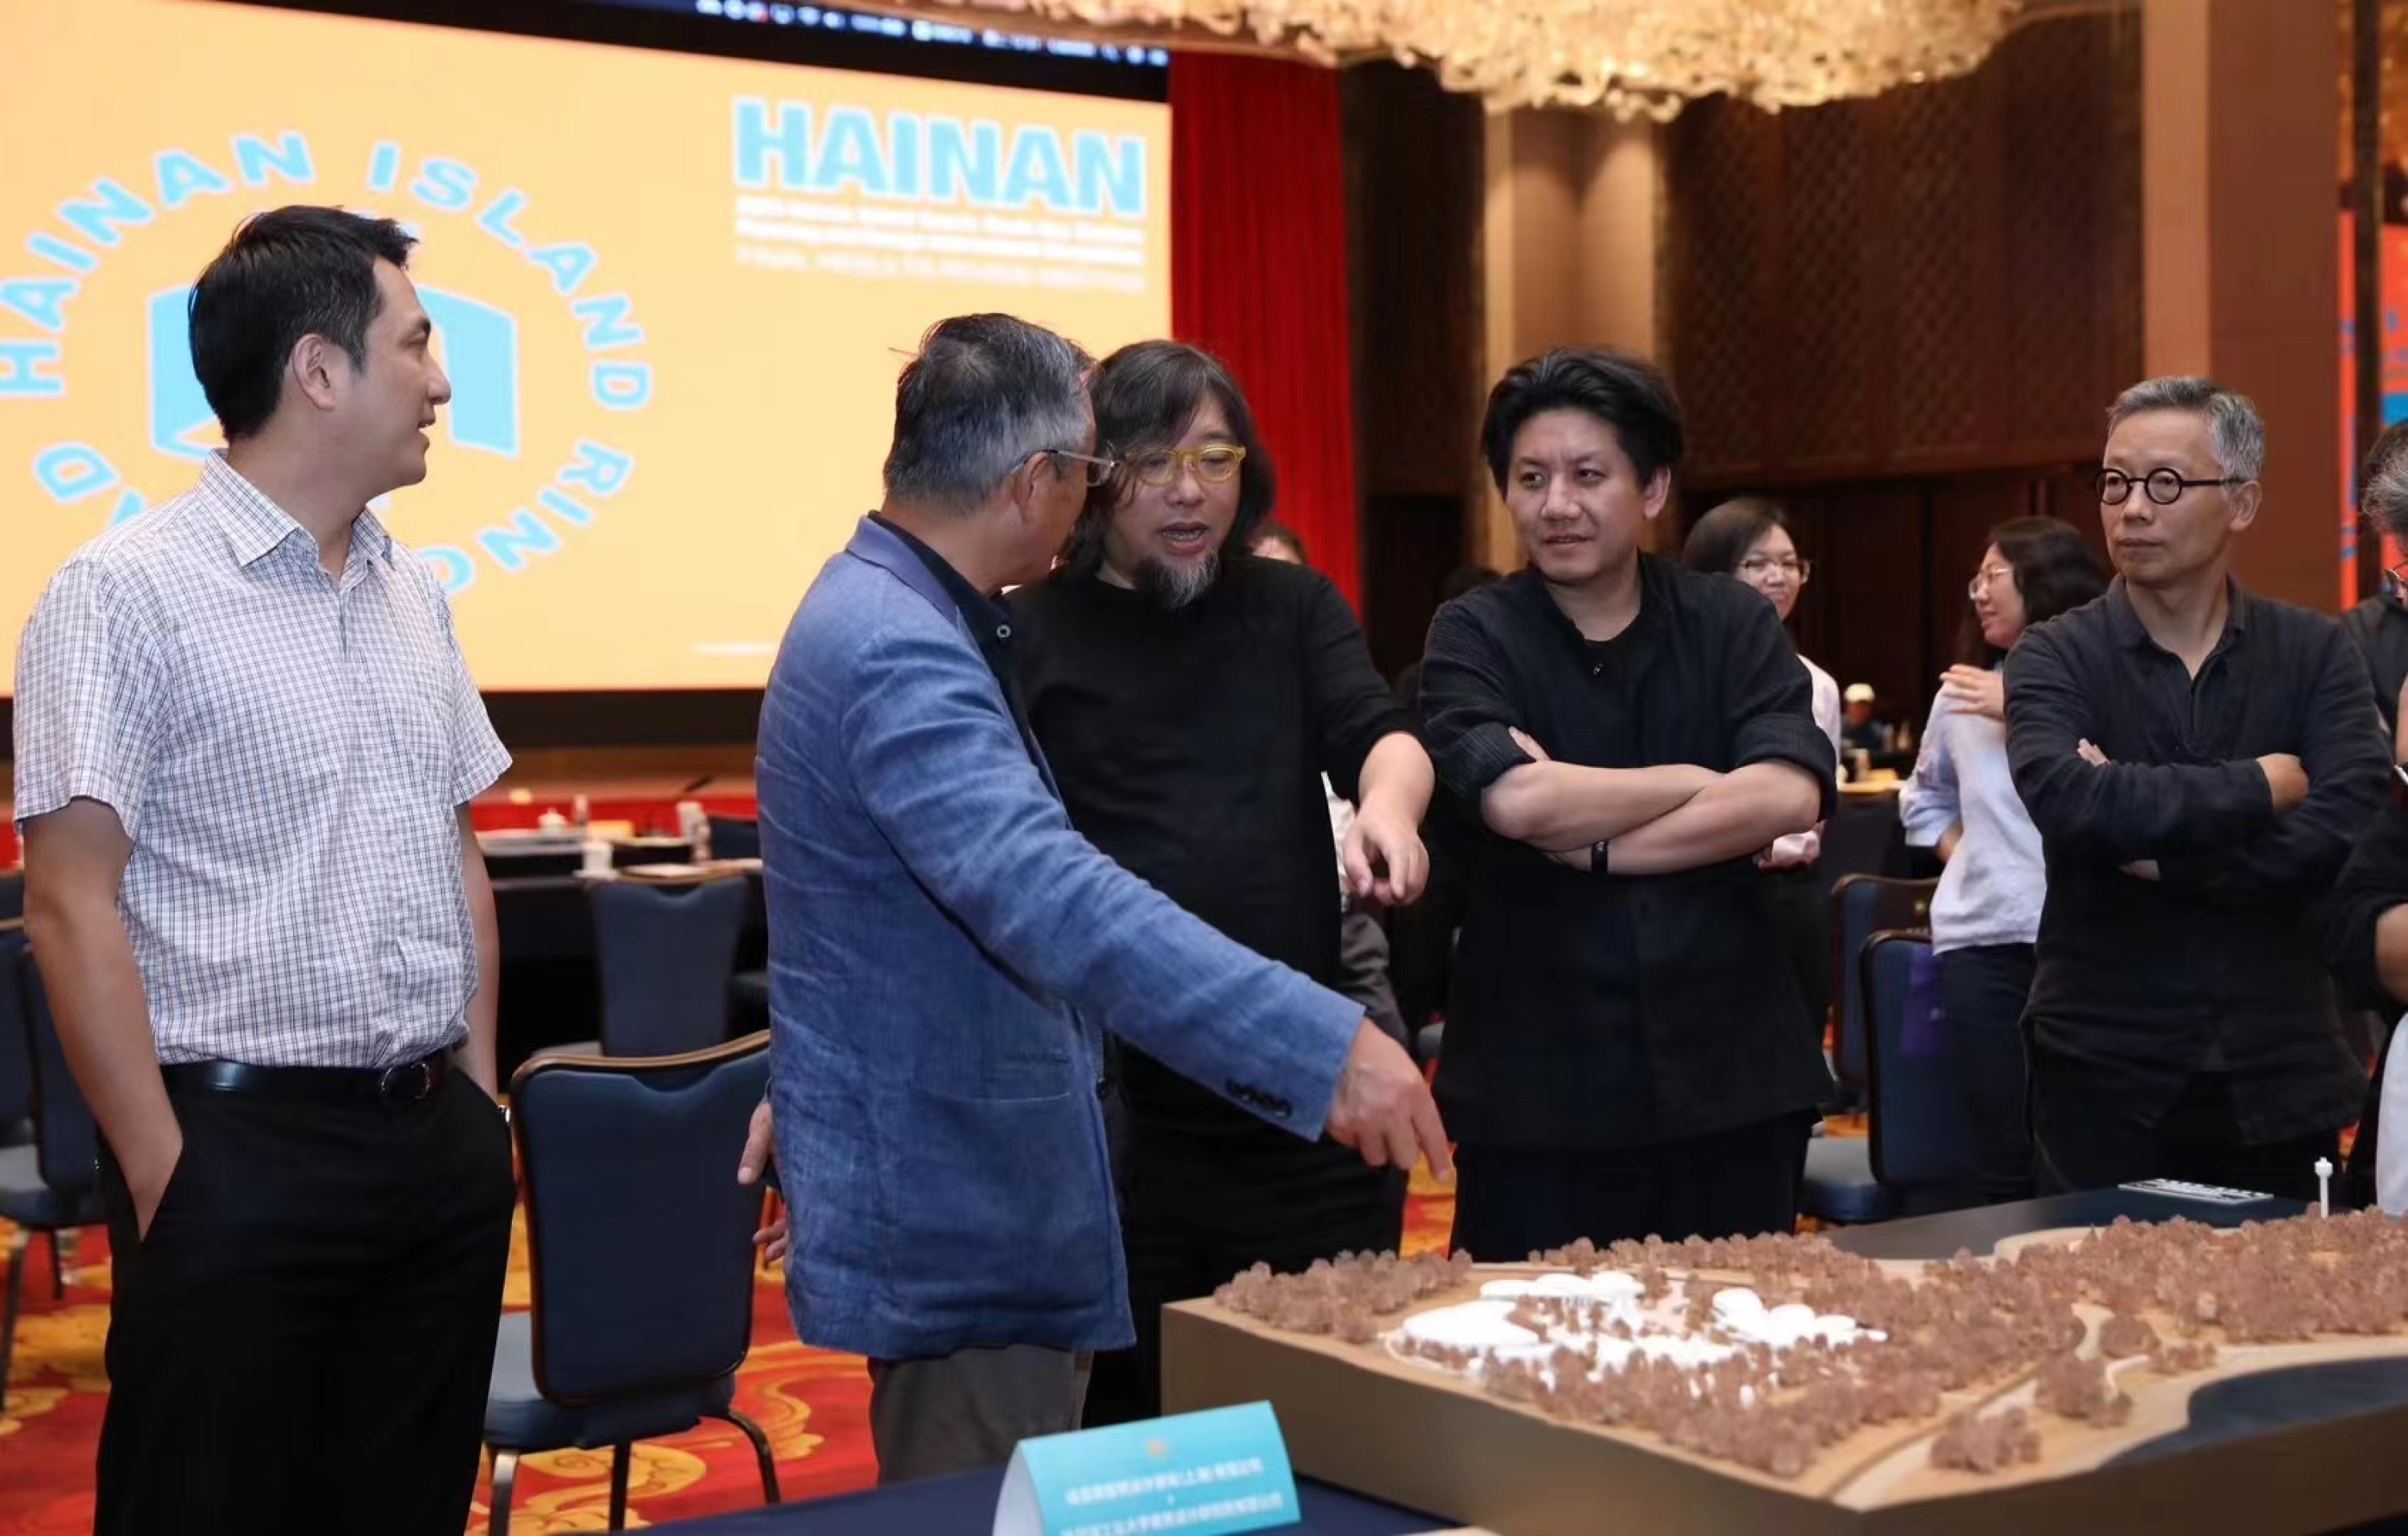 The Results of the “2023 Hainan Island Scienic Route Key Stations Planning and Design International Competition” was Announced, with Zigeng Wang Invited as a Critic for the Final Review Committee